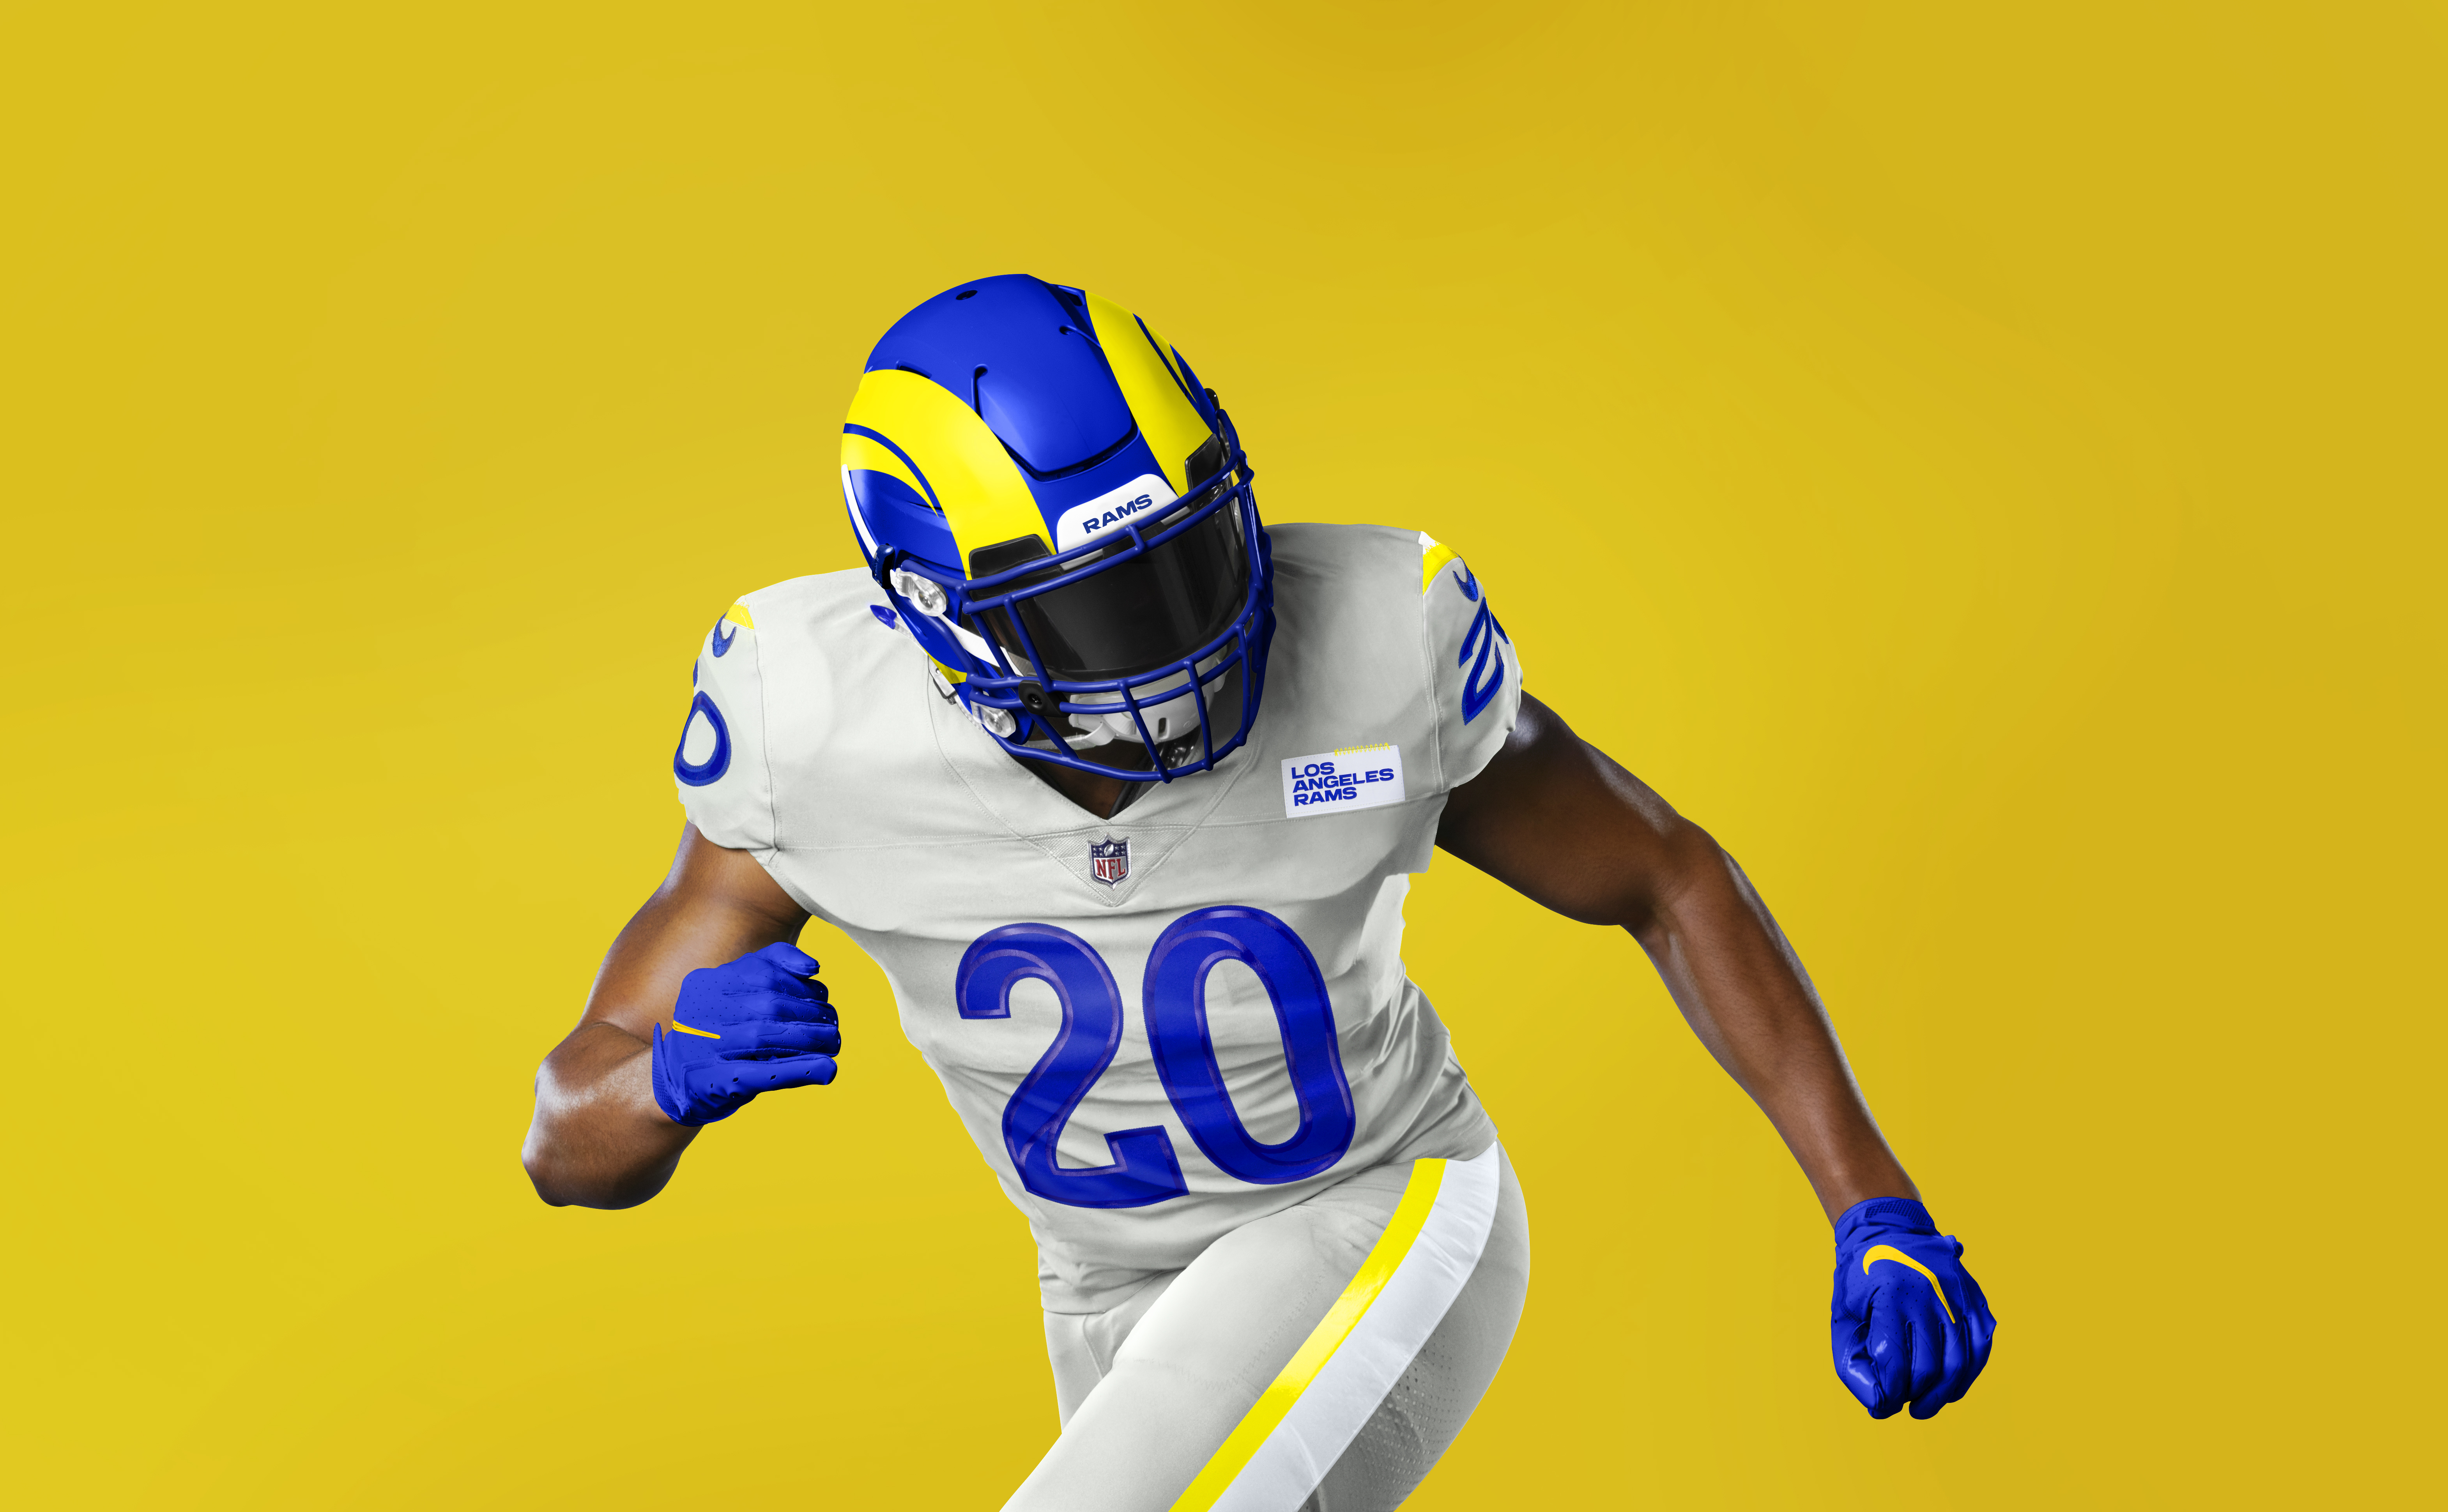 Images Here Are the Los Angeles Rams’ Vibrant New Uniforms NBC Los